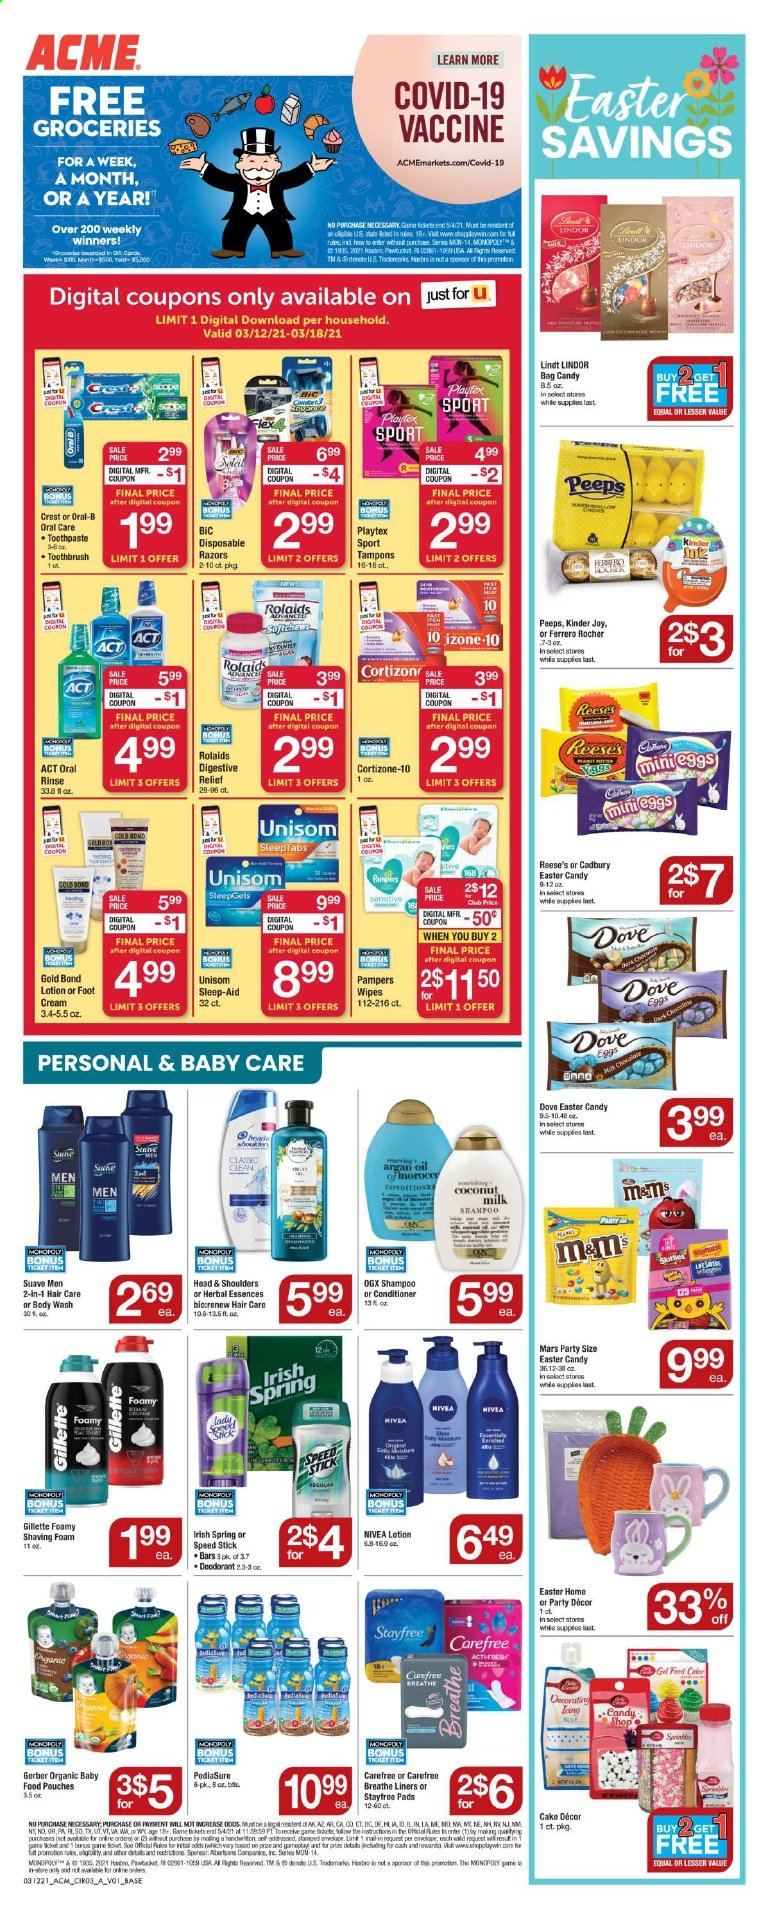 thumbnail - ACME Flyer - 03/12/2021 - 03/18/2021 - Sales products - cake, curd, Reese's, Lindt, Lindor, Ferrero Rocher, Kinder Joy, Mars, Cadbury, Digestive, Peeps, Gerber, coconut milk, oil, Pampers, Nivea, Dove, wipes, Joy, body wash, shampoo, Suave, toothbrush, Oral-B, toothpaste, Crest, Stayfree, Playtex, Carefree, tampons, OGX, conditioner, Head & Shoulders, Herbal Essences, body lotion, anti-perspirant, Speed Stick, deodorant, BIC, Gillette, shaving foam, disposable razor, bag, Monopoly, Hasbro, Unisom, argan oil. Page 4.